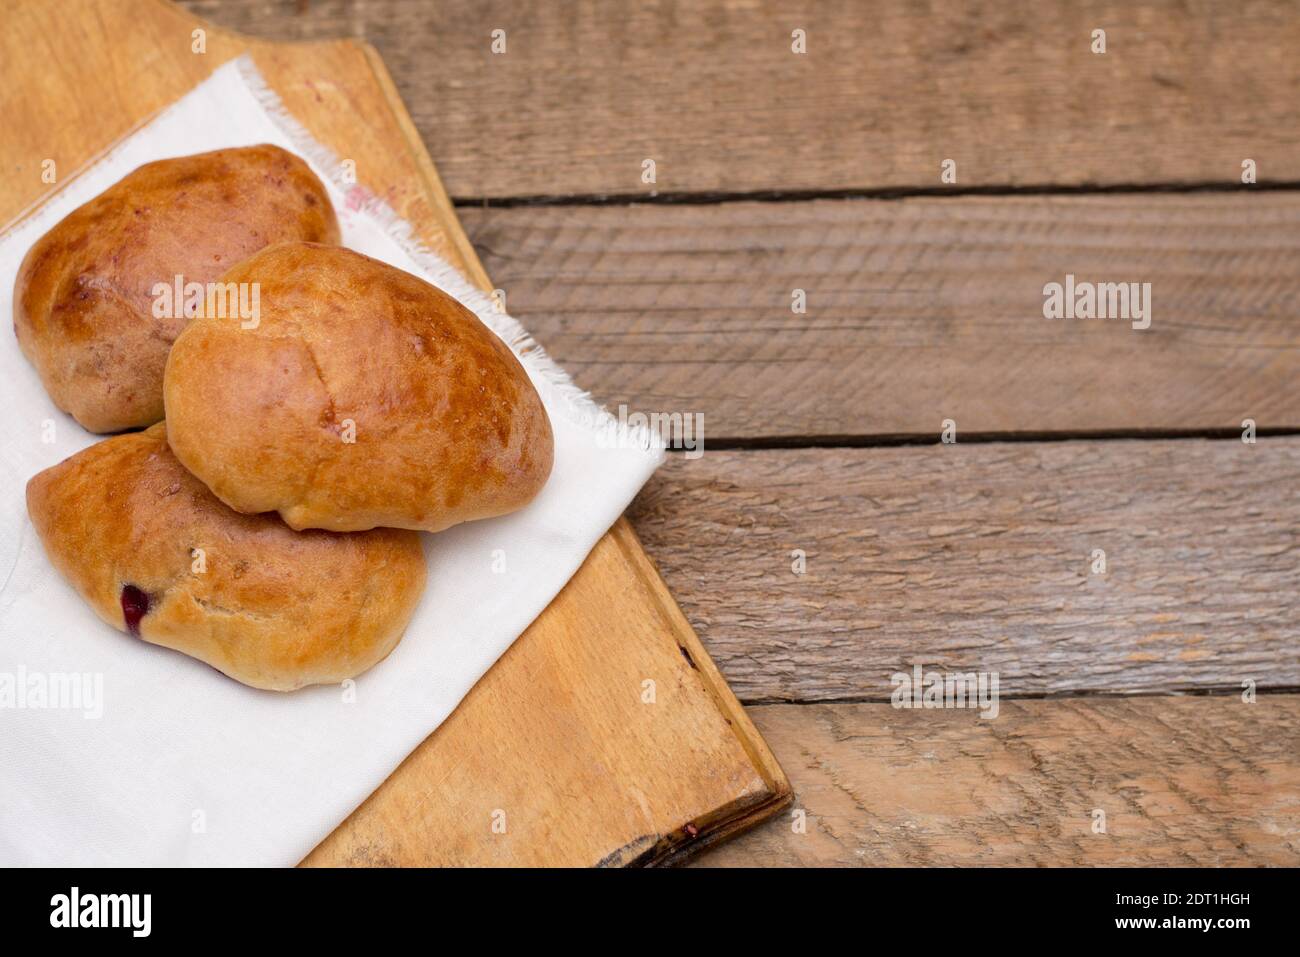 Russian pirozhki (baked patties) with berries on wooden cutboard on wooden background. Stock Photo